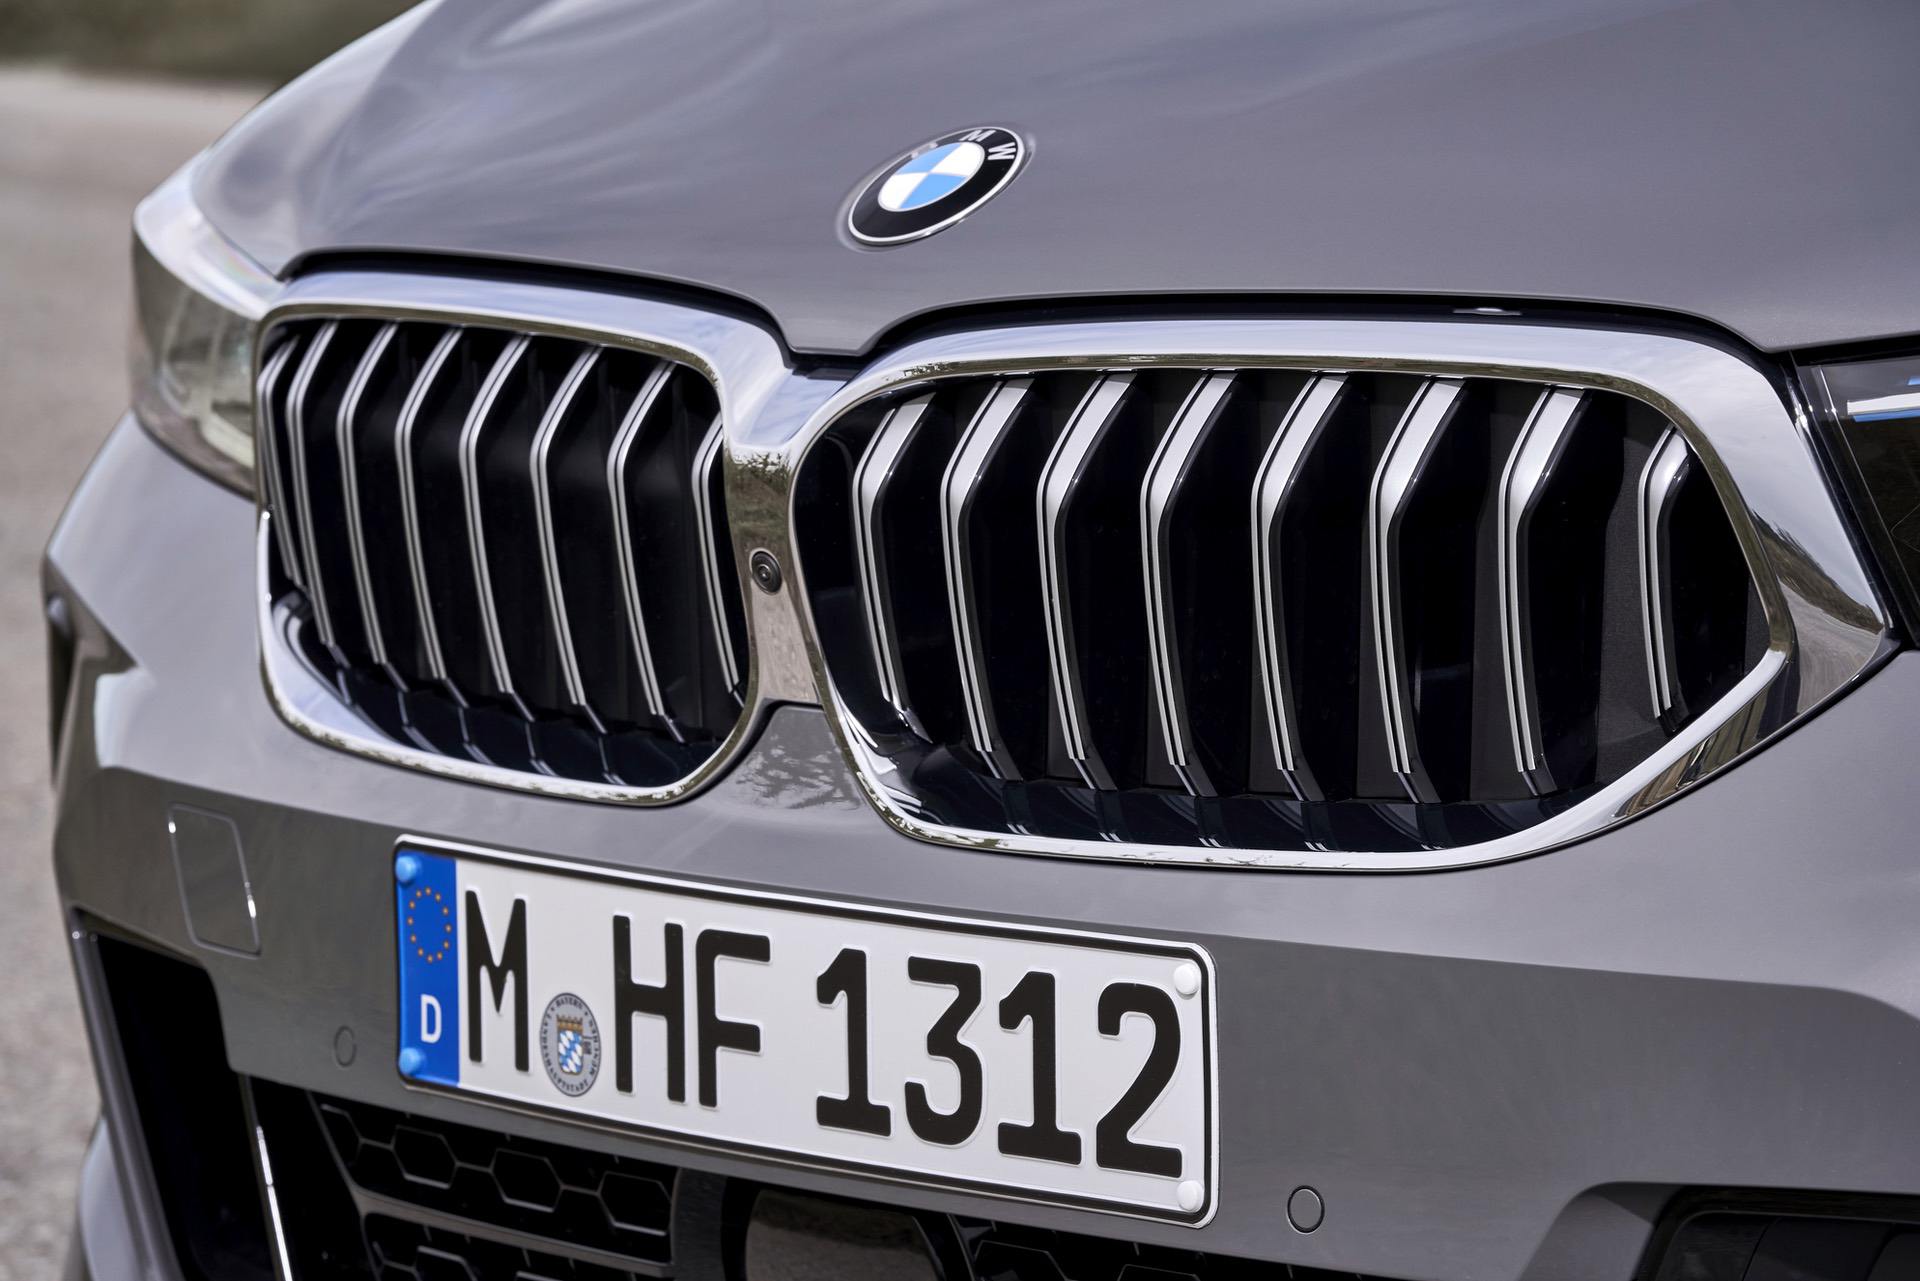 2021 BMW 6 Series Gran Turismo Facelift - New Photo Gallery